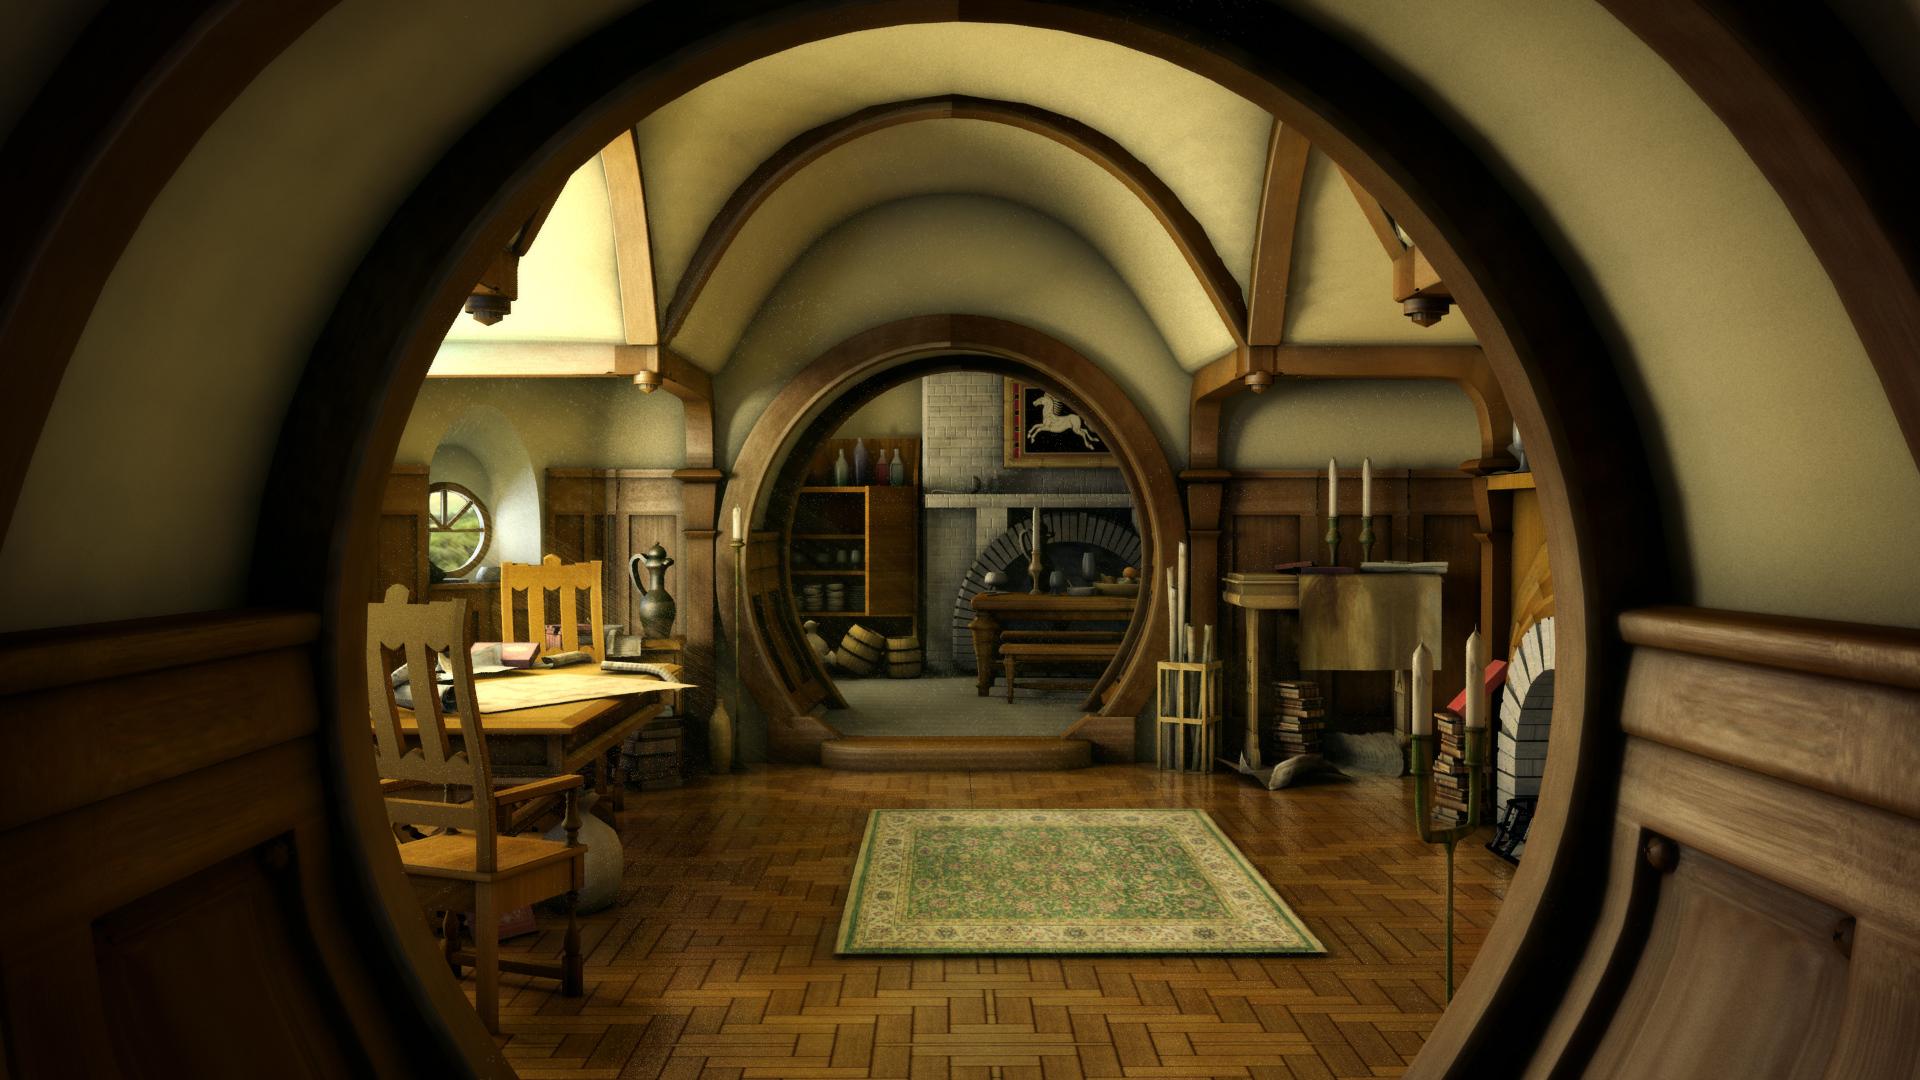 The_Hobbit_lord_rings_lotr_architecture_house_room_building_fantasy_interior_design_1920x1080